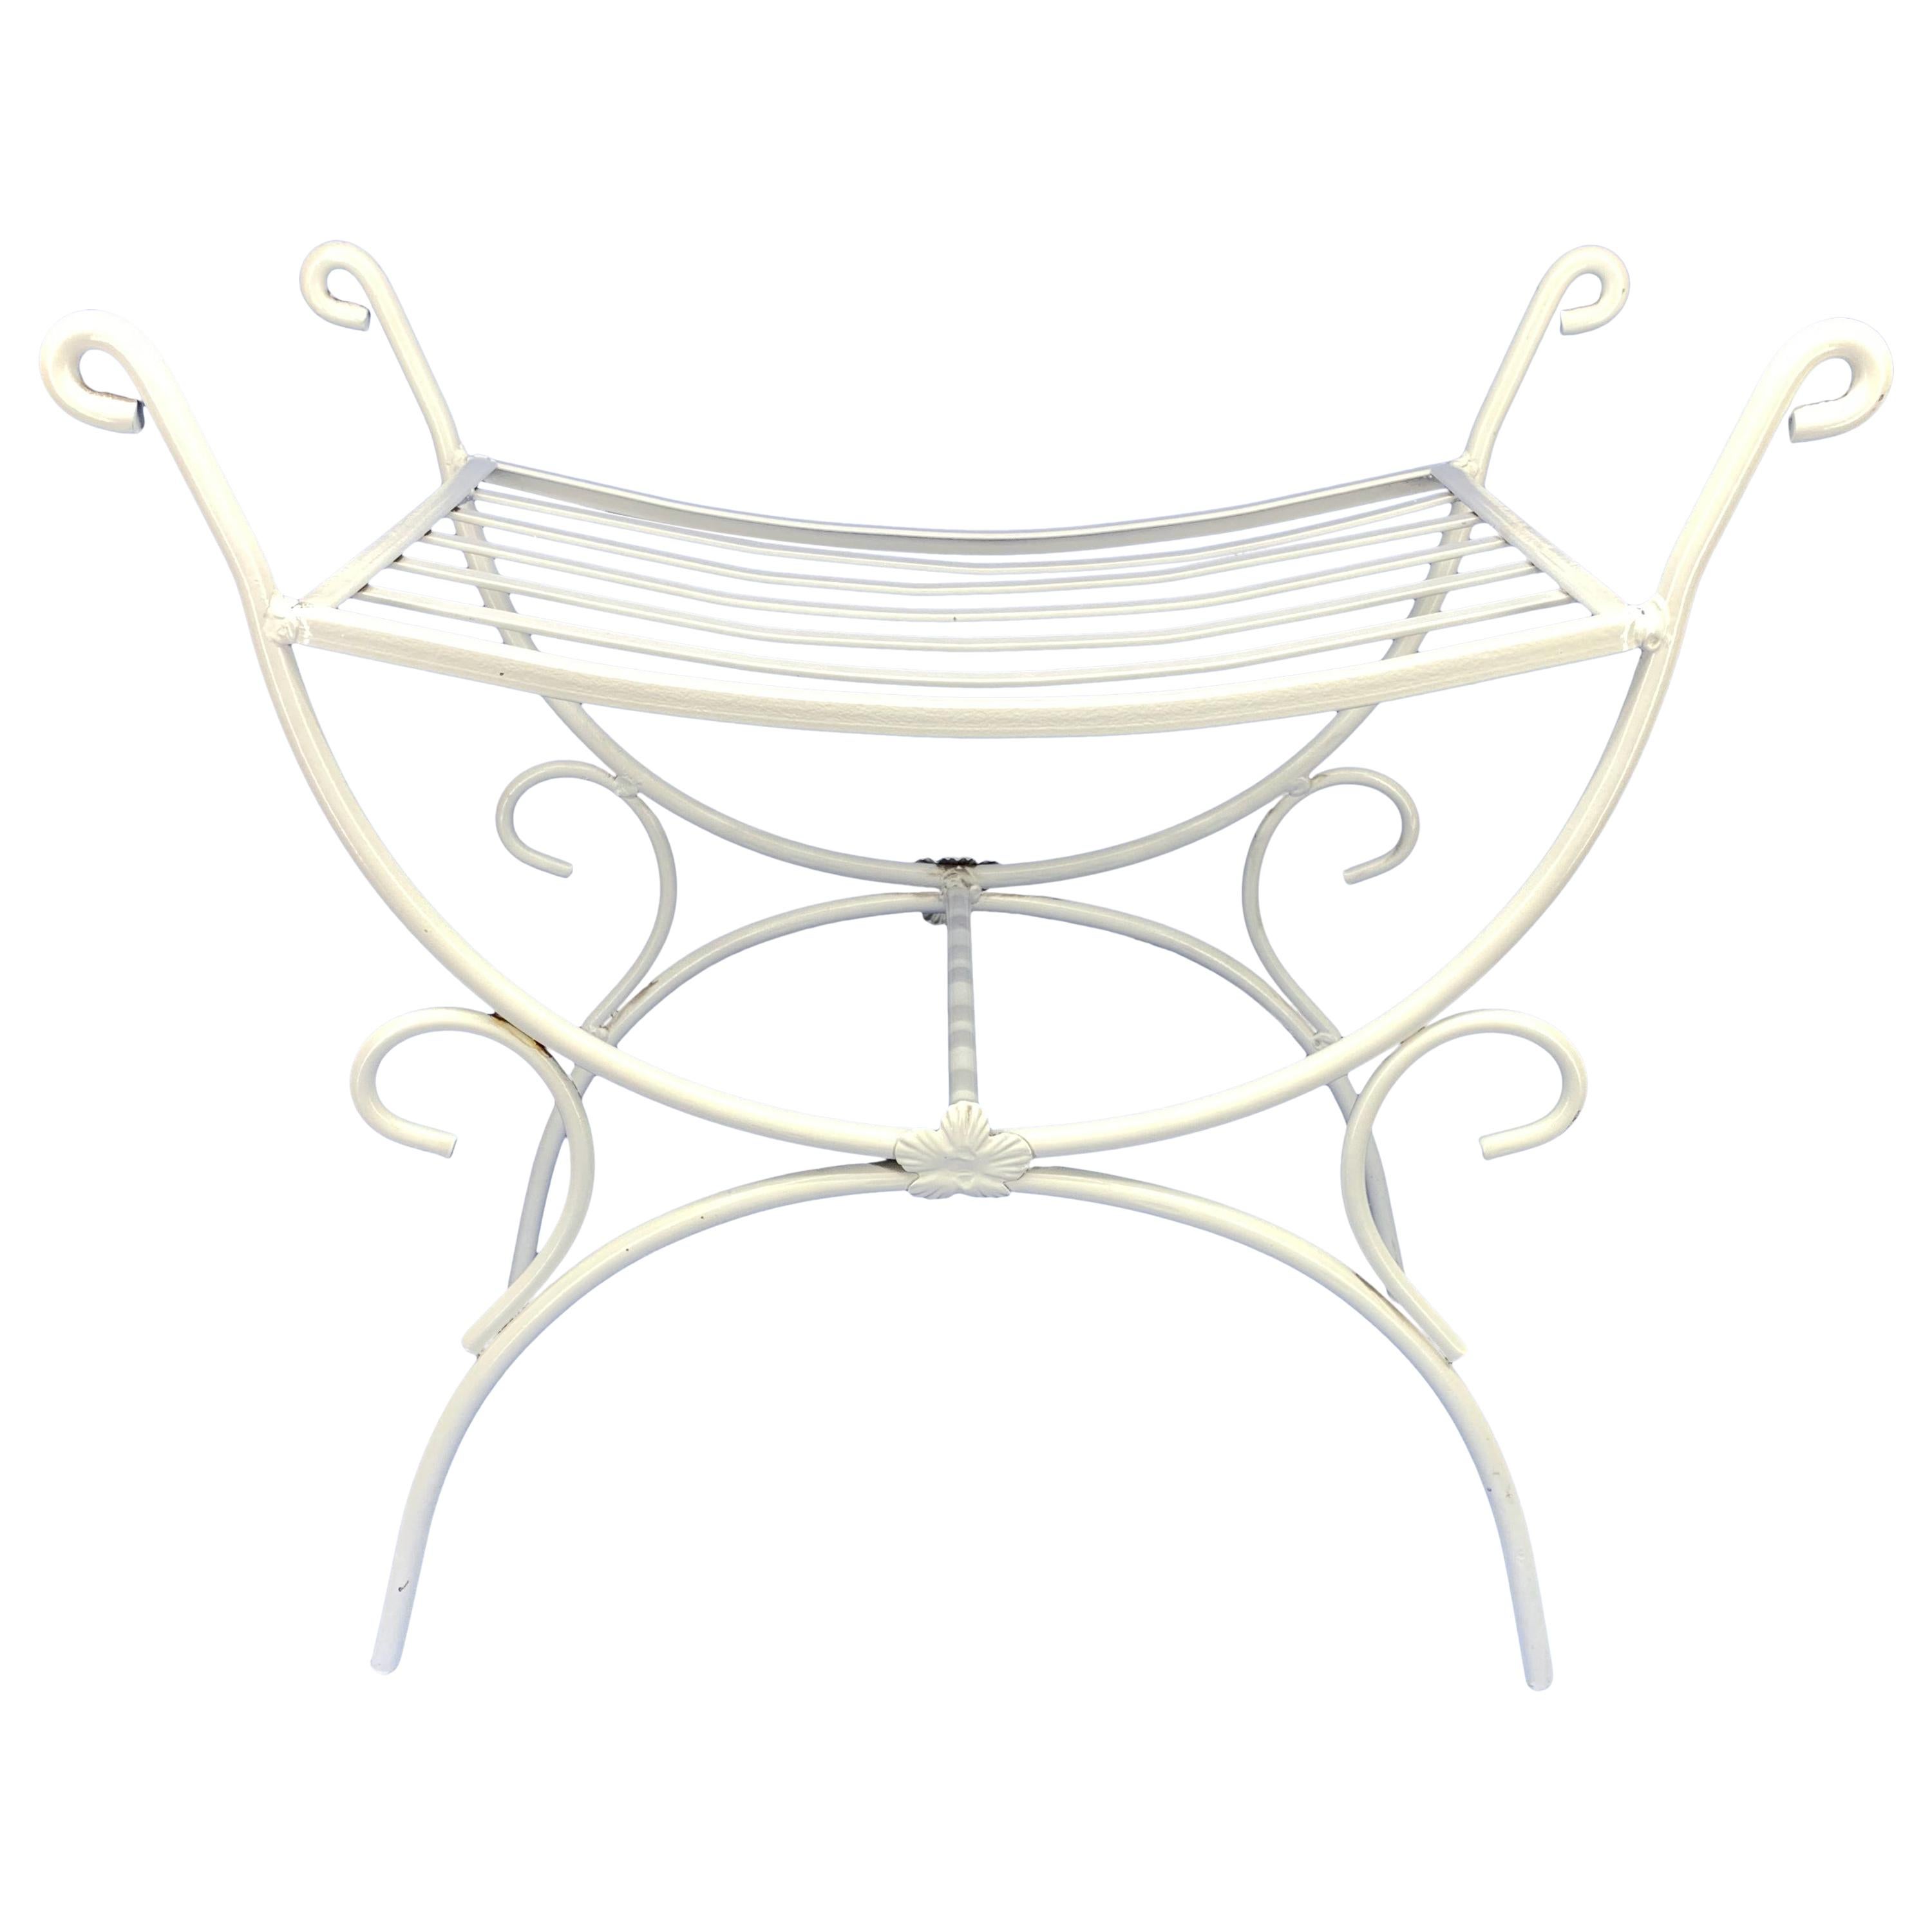 White Powder-Coated Metal Stool Or Bench For Sale